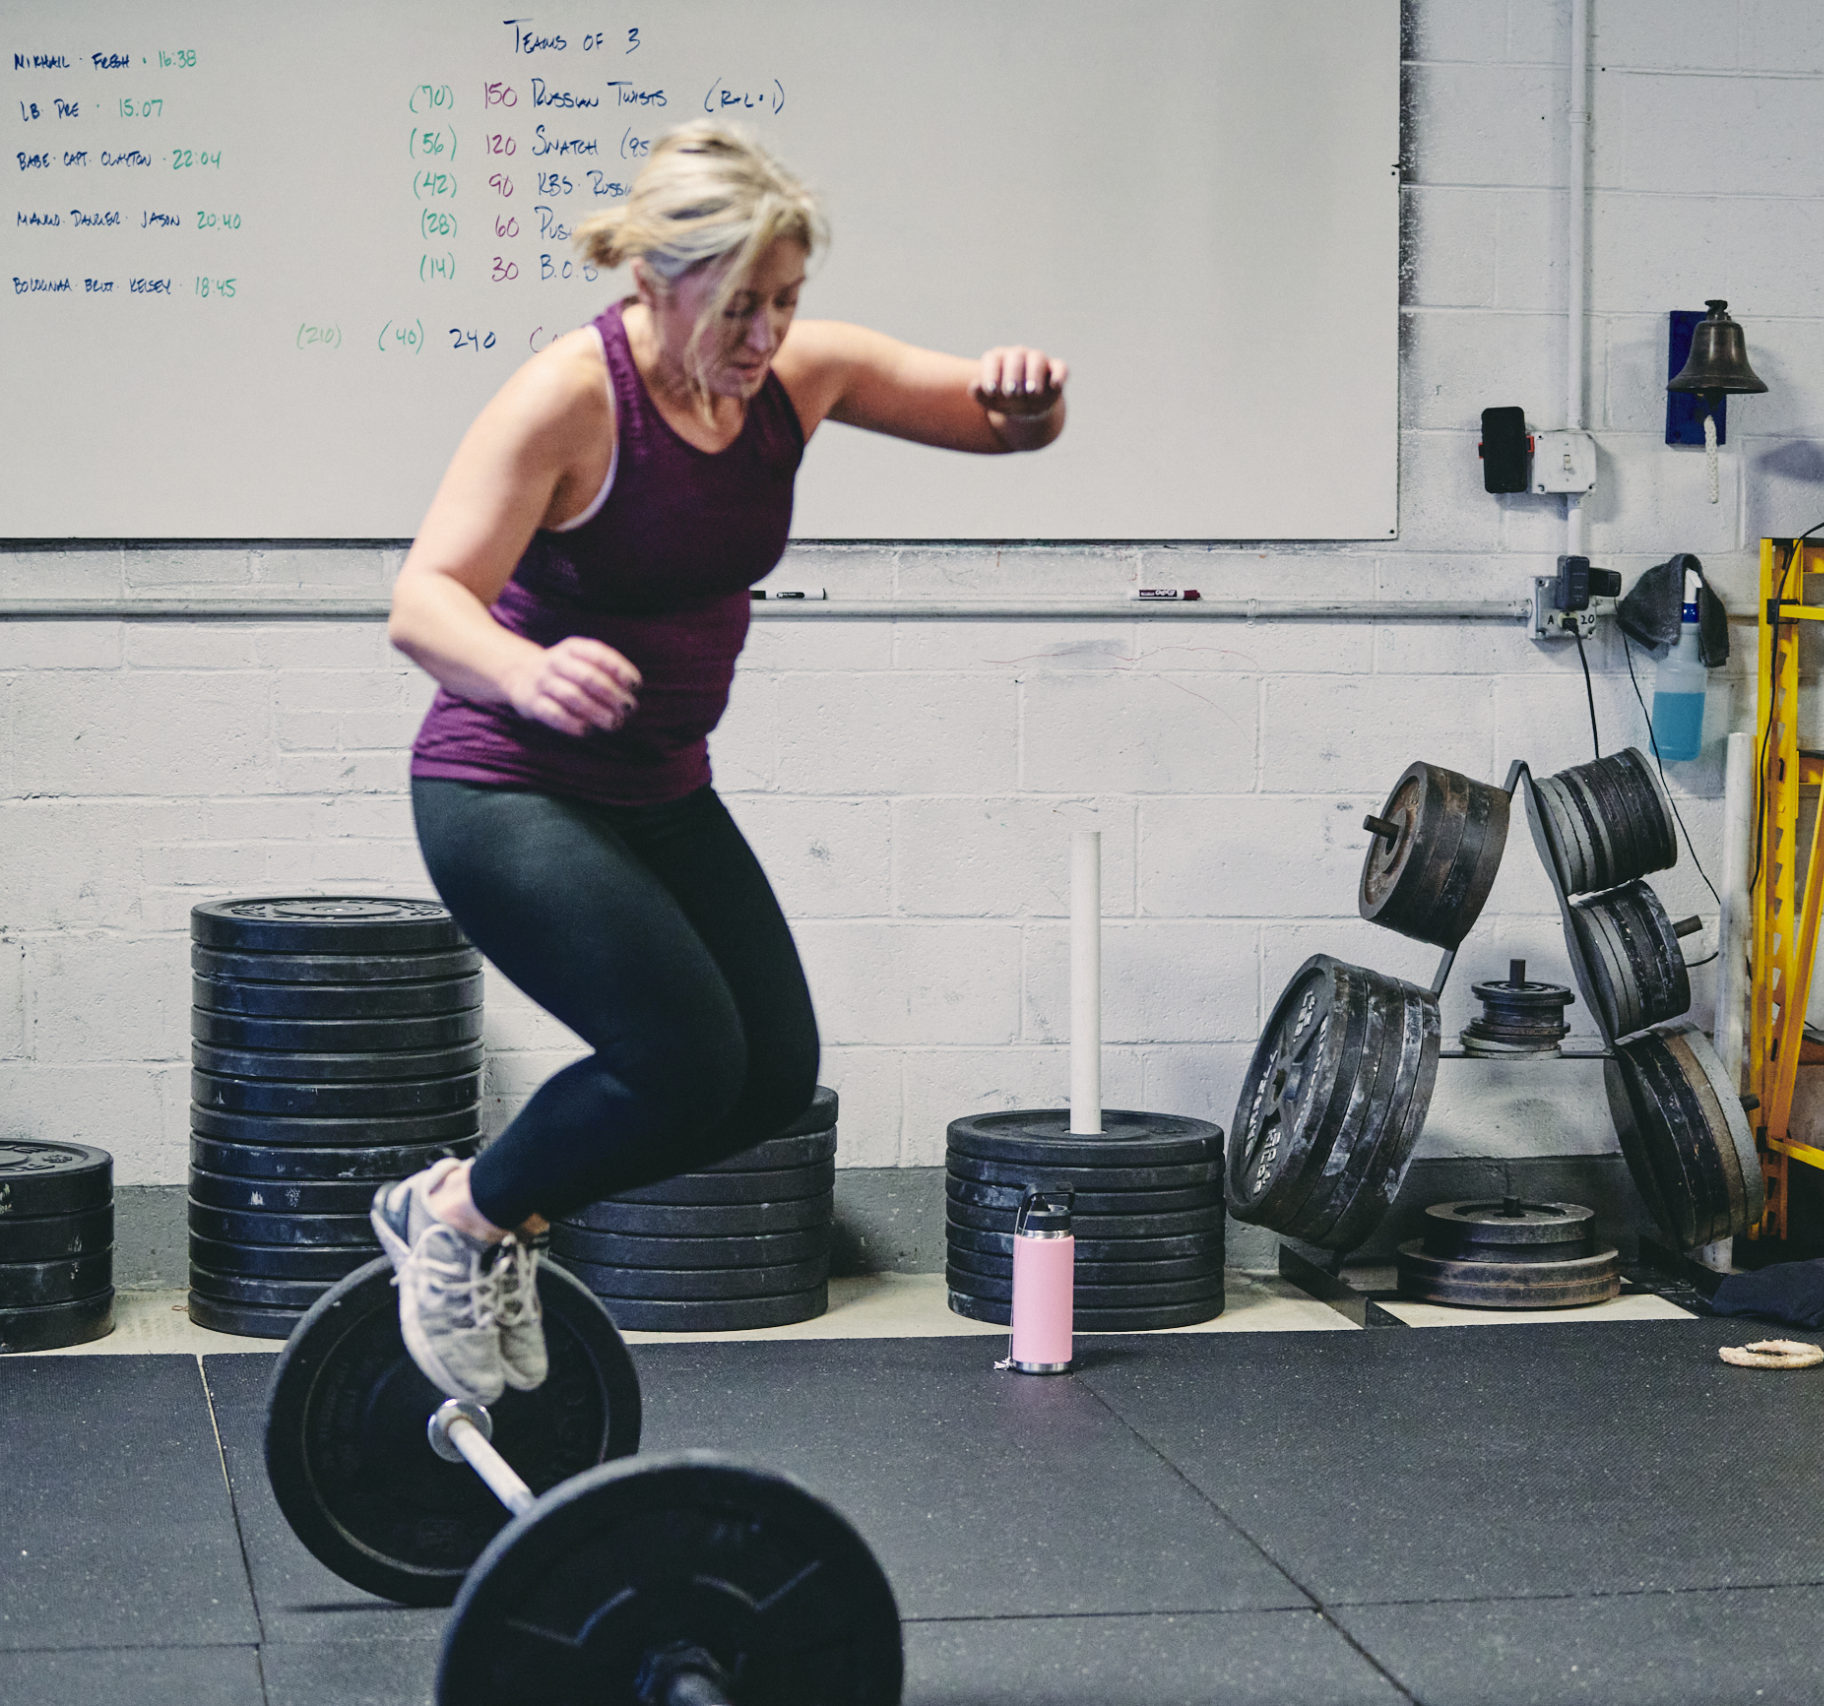 A woman is jumping in the air while holding onto a barbell.